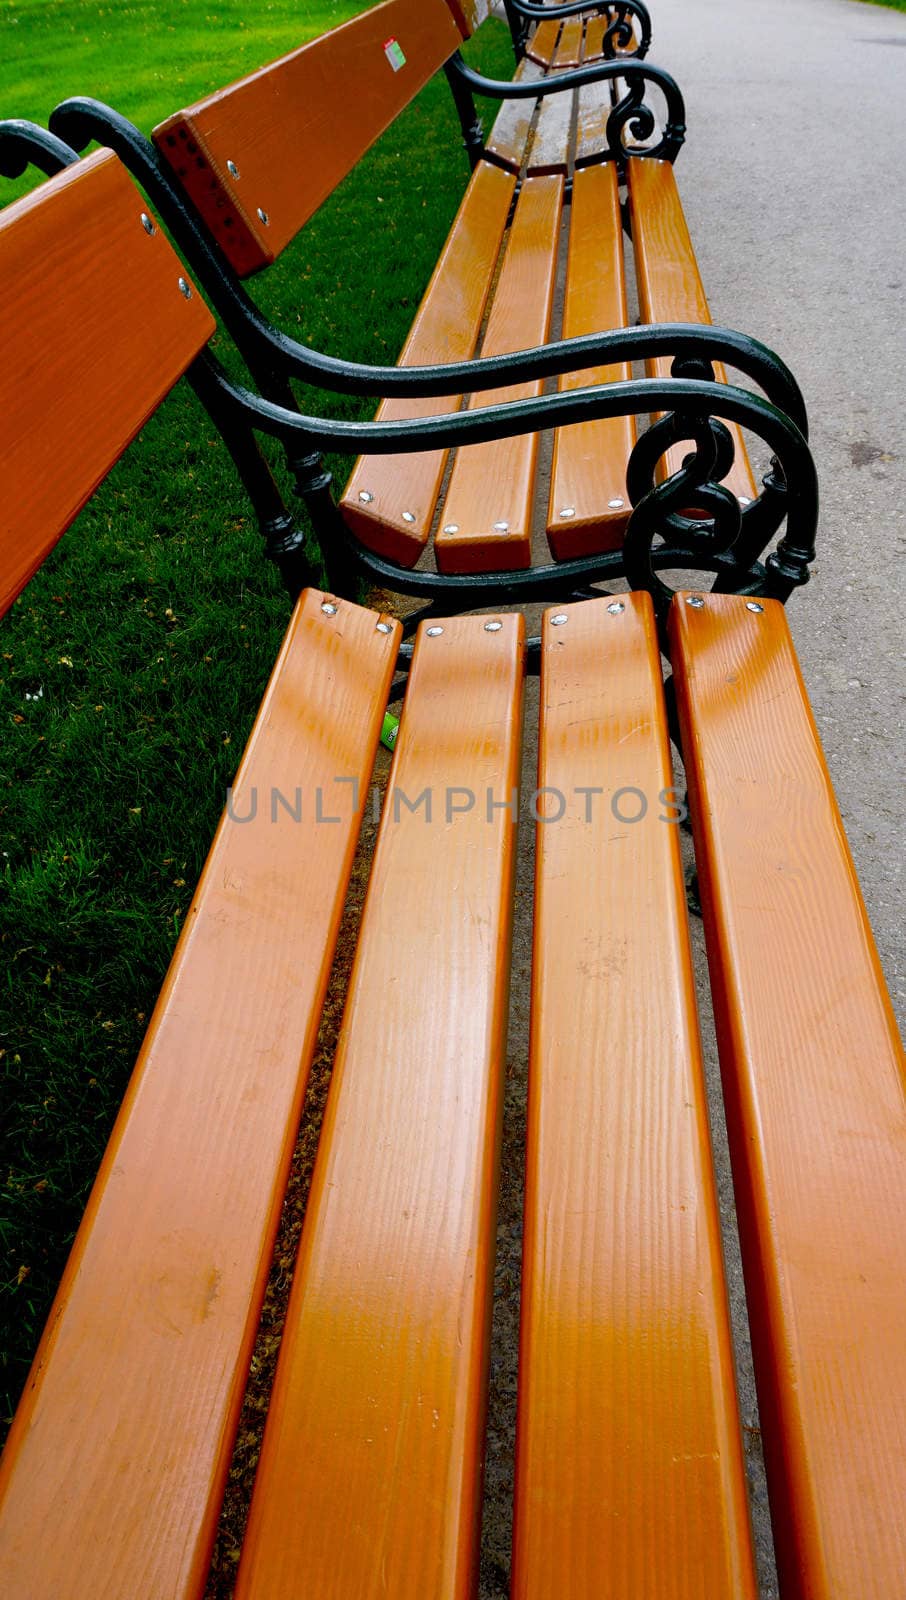 Wooden Bench seat in the park by polarbearstudio